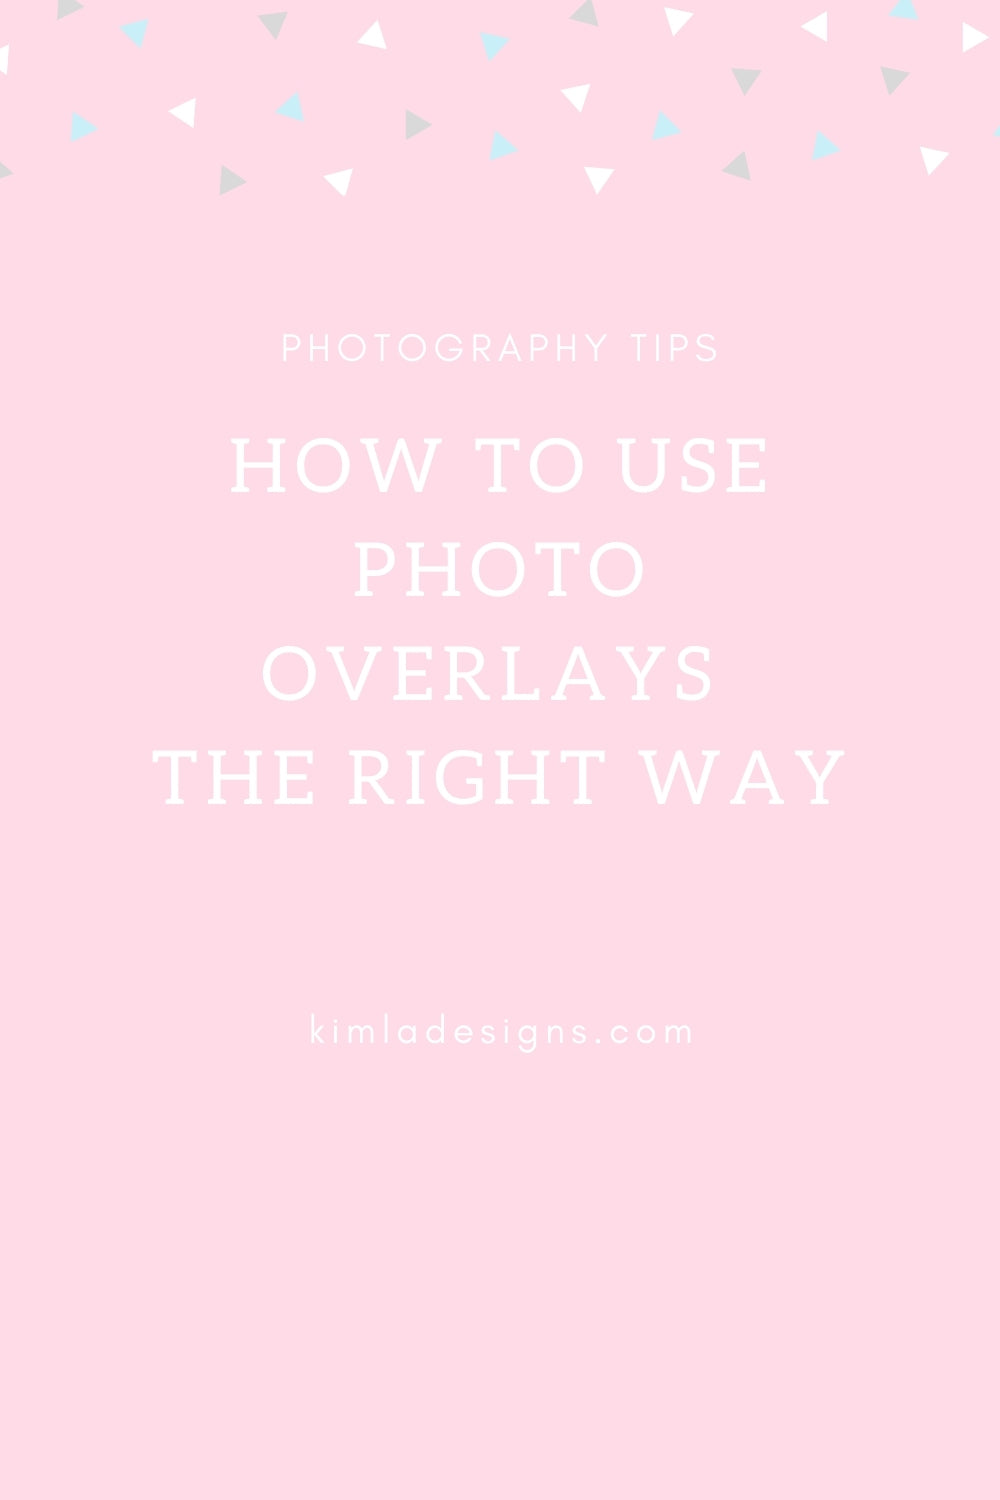 Person - How to use Photo Overlays the Right Way? Complete Guide